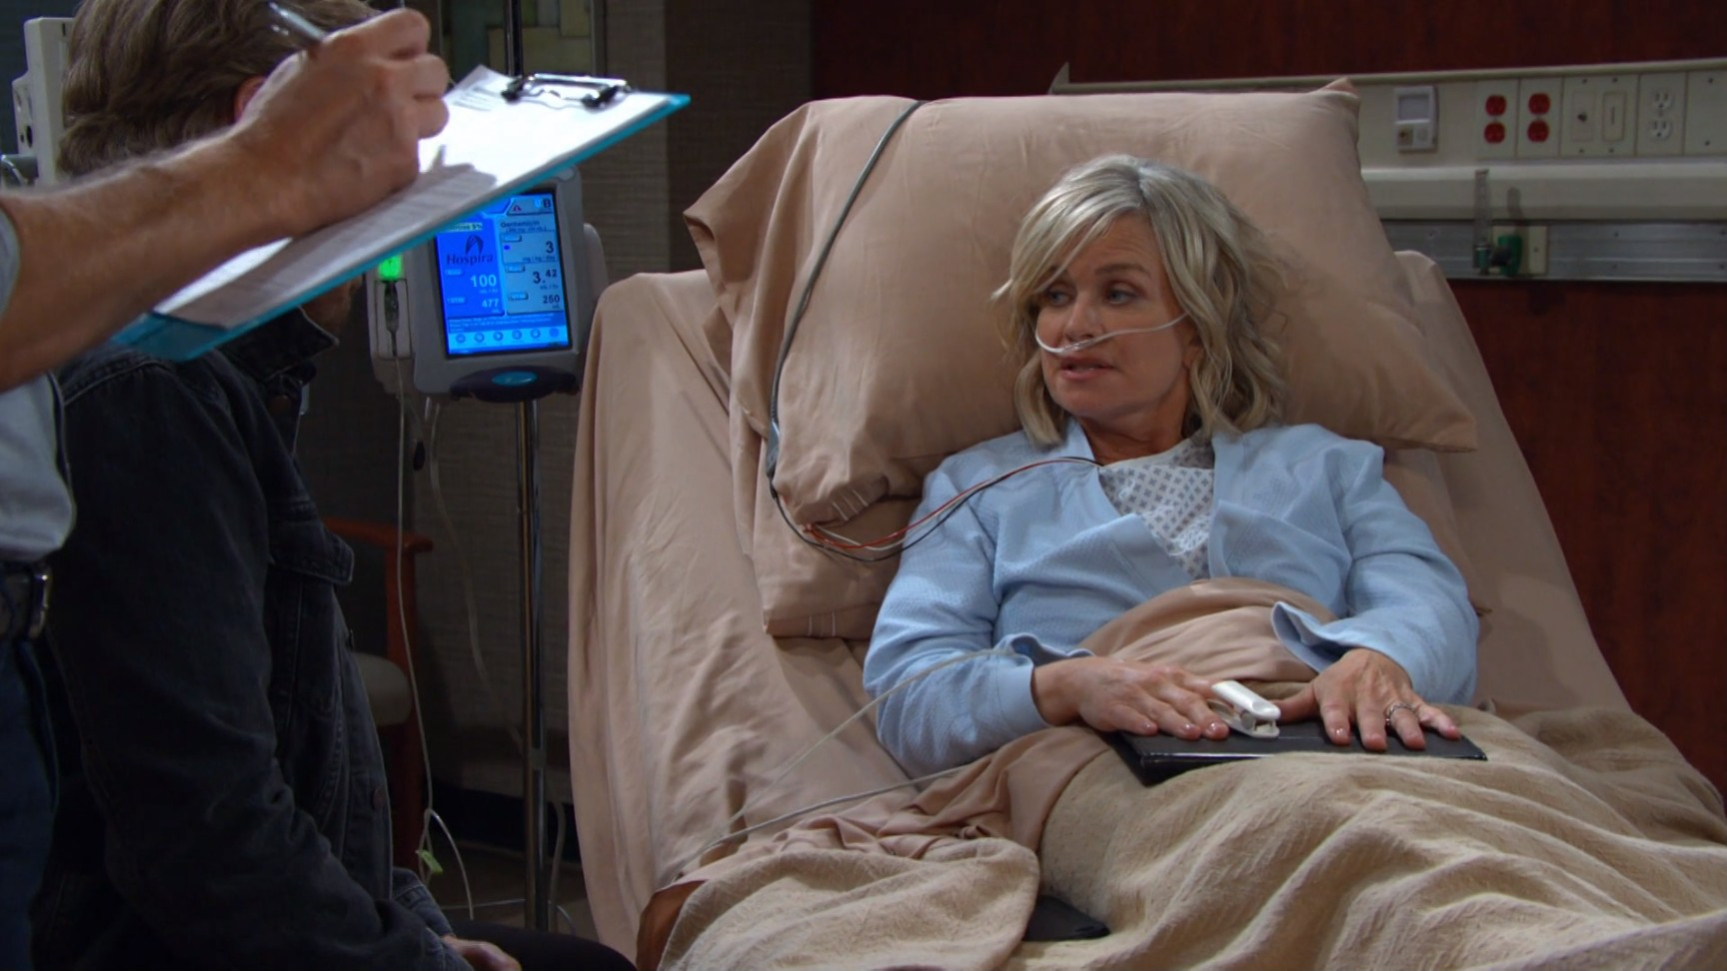 kayla hospitalized again Days of our lives recaps soapsspoilers